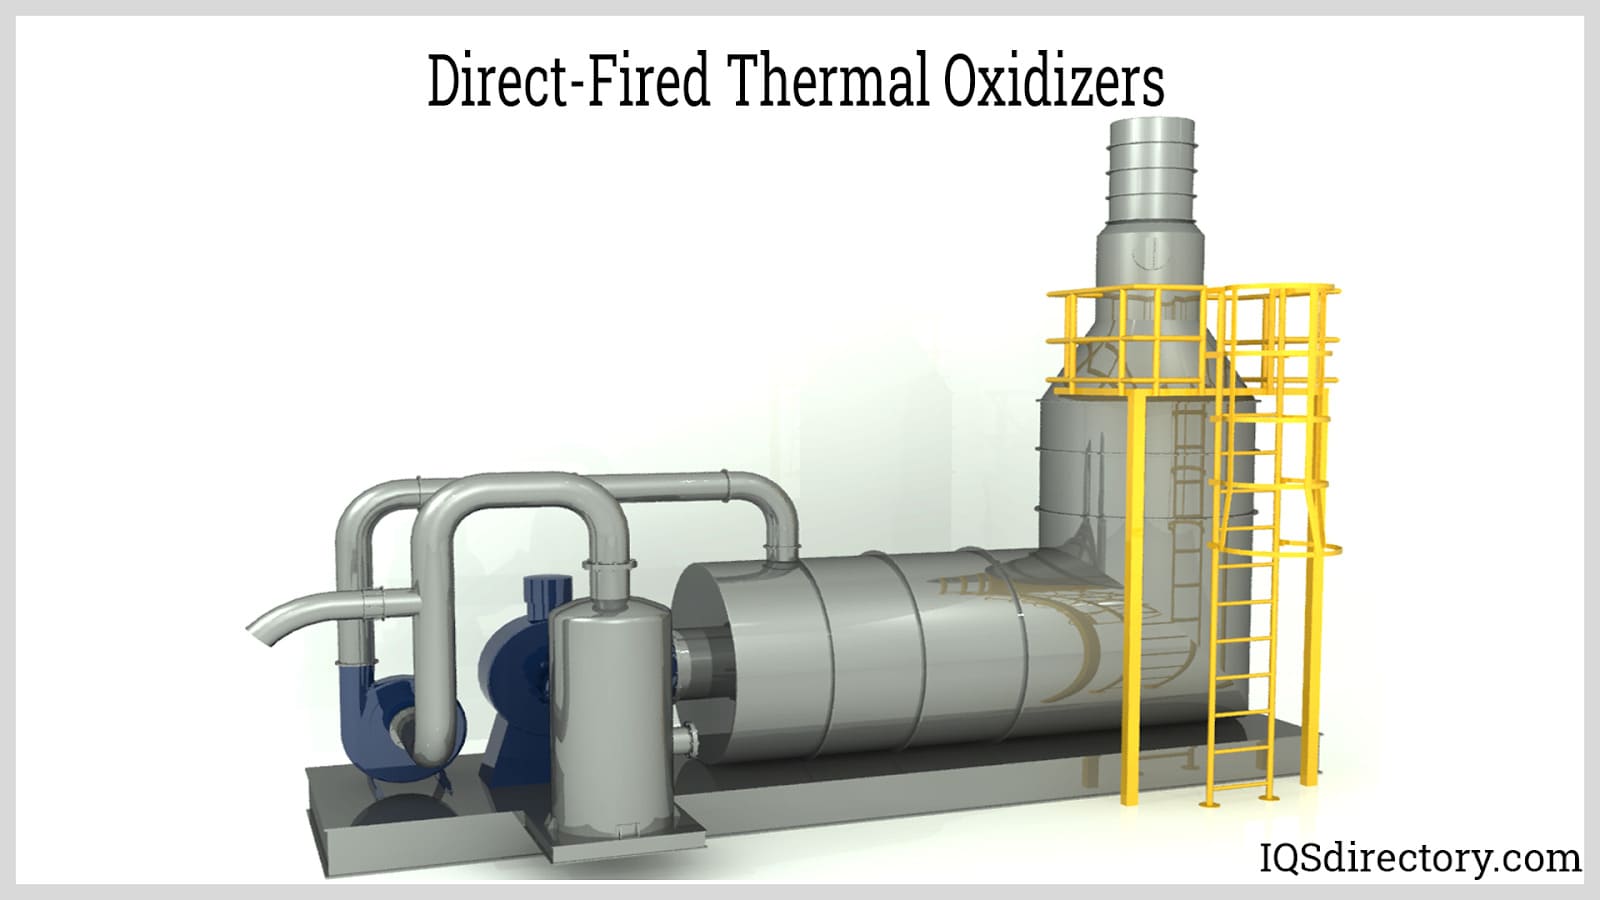 Direct-Fired Thermal Oxidizers